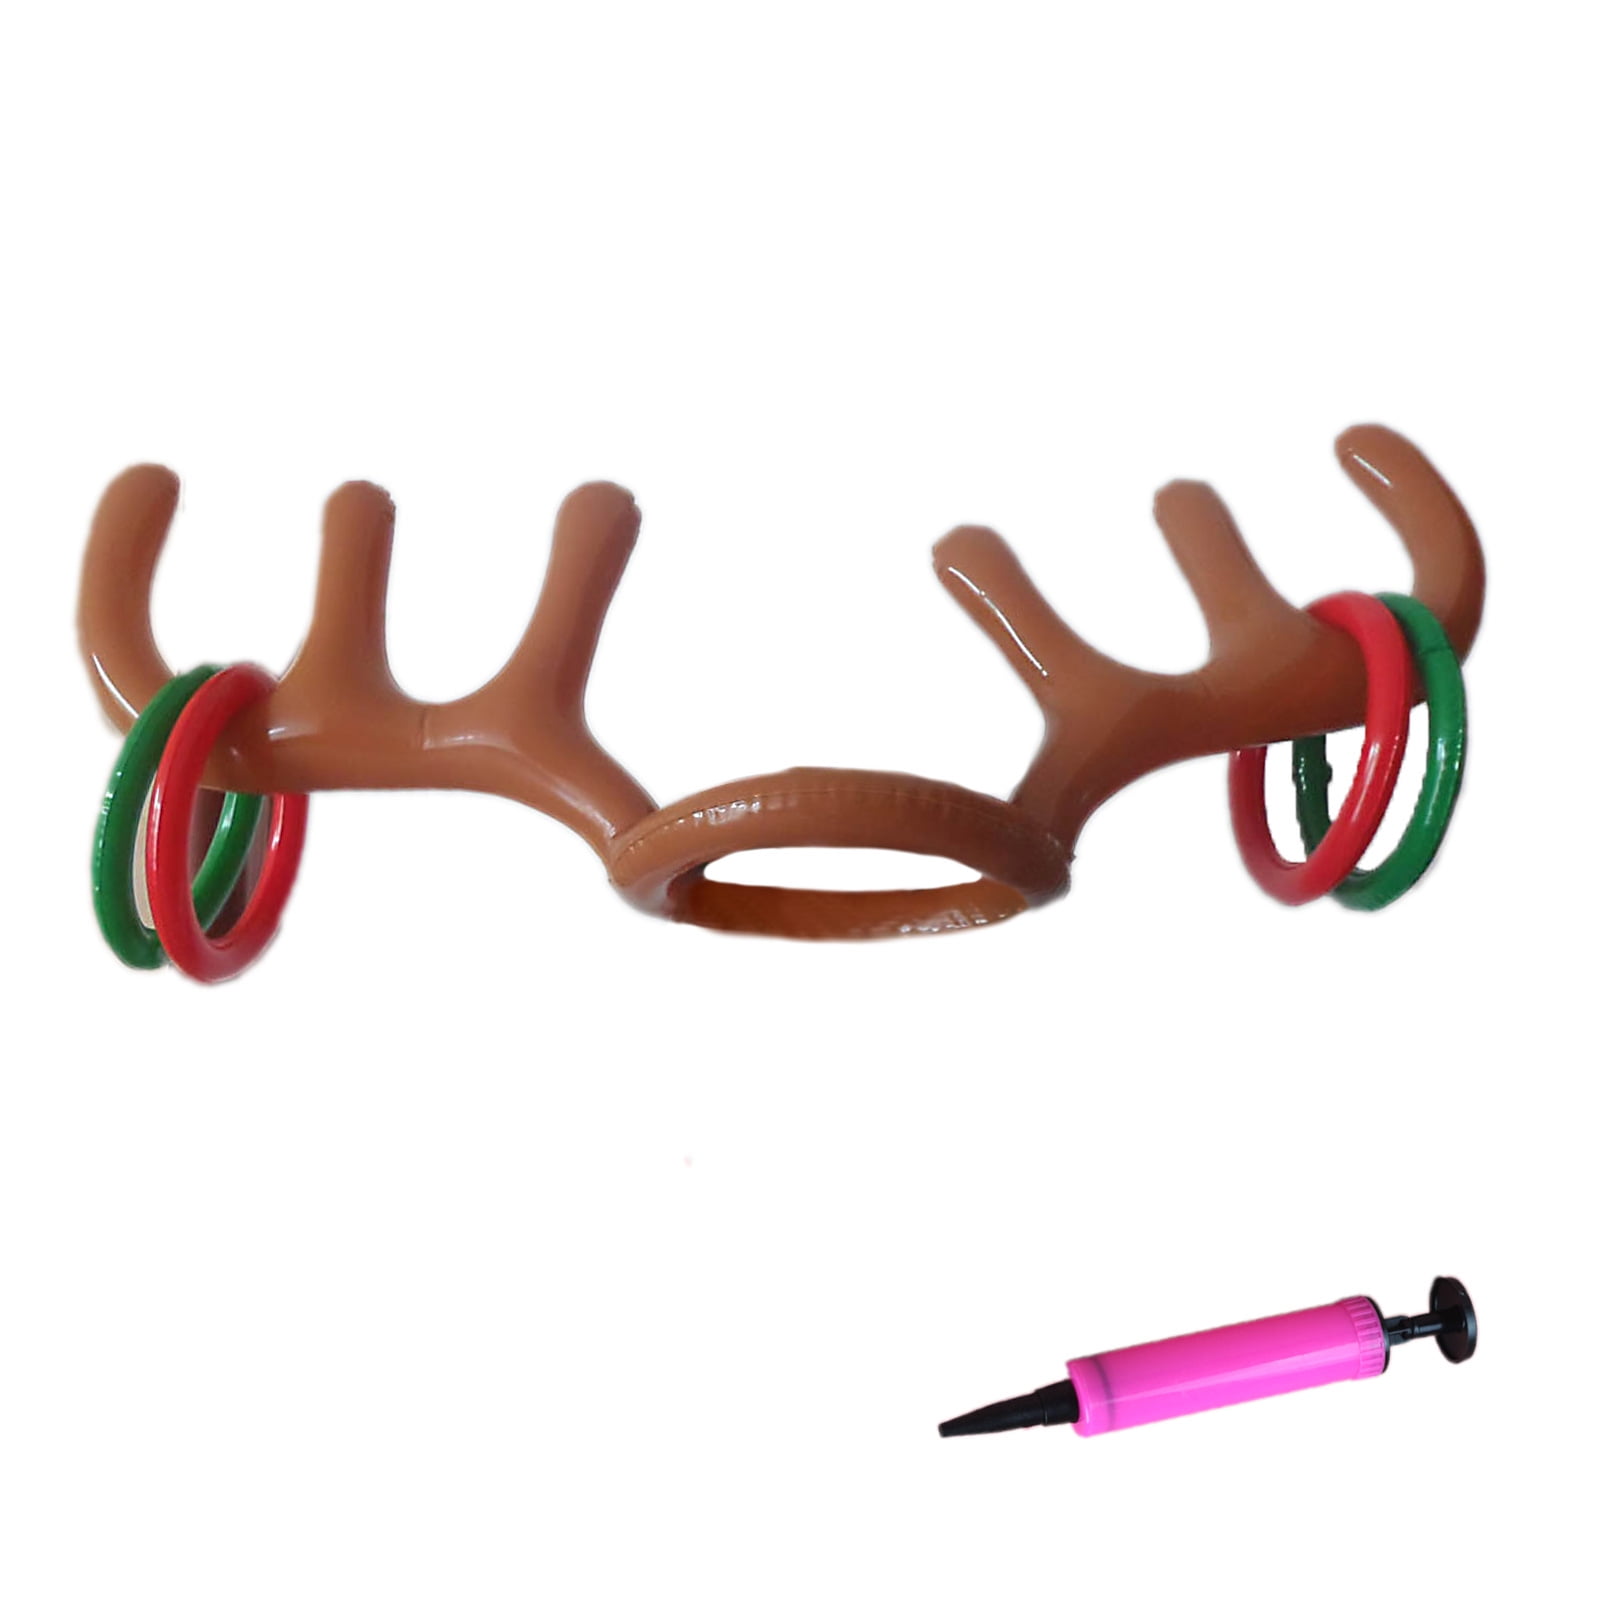 COSORO 2Pcs Christmas Party Inflatable Reindeer Antler Hat Ring Toss Game with Rings for Family Kids Office Xmas Holiday Party Fun Games